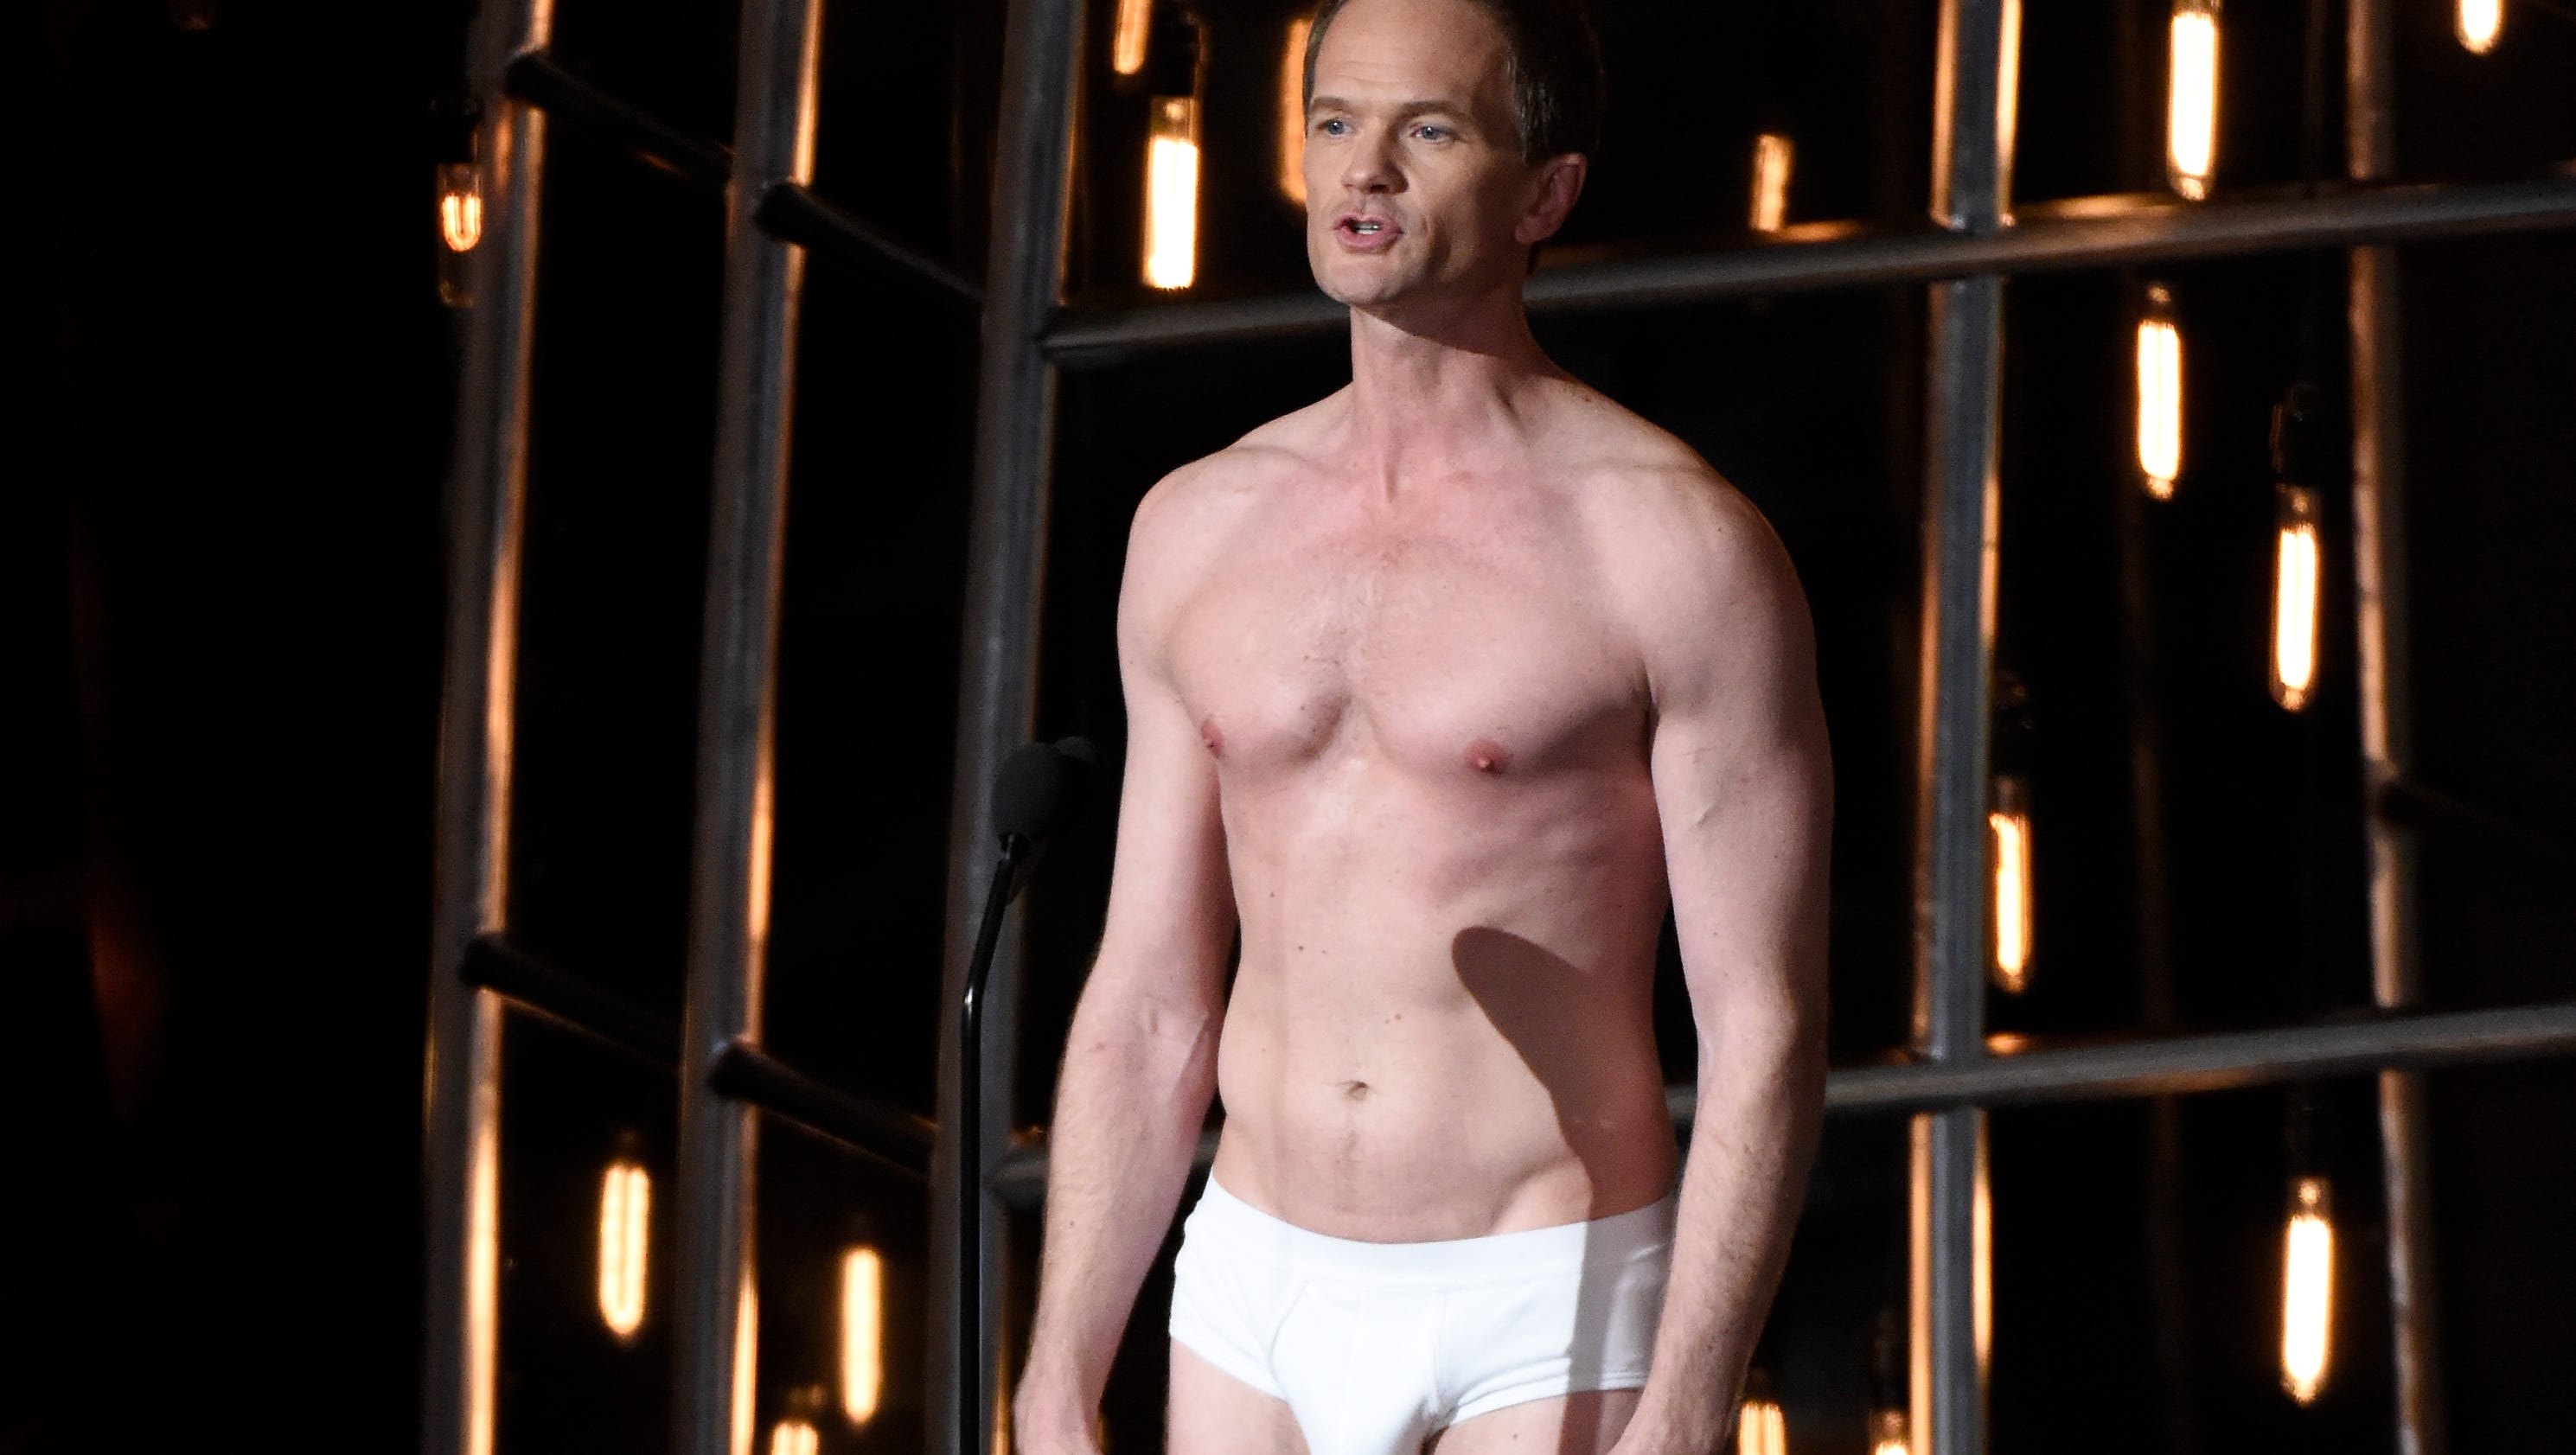 Underwear To Awareness Most Memorable Oscar Moments